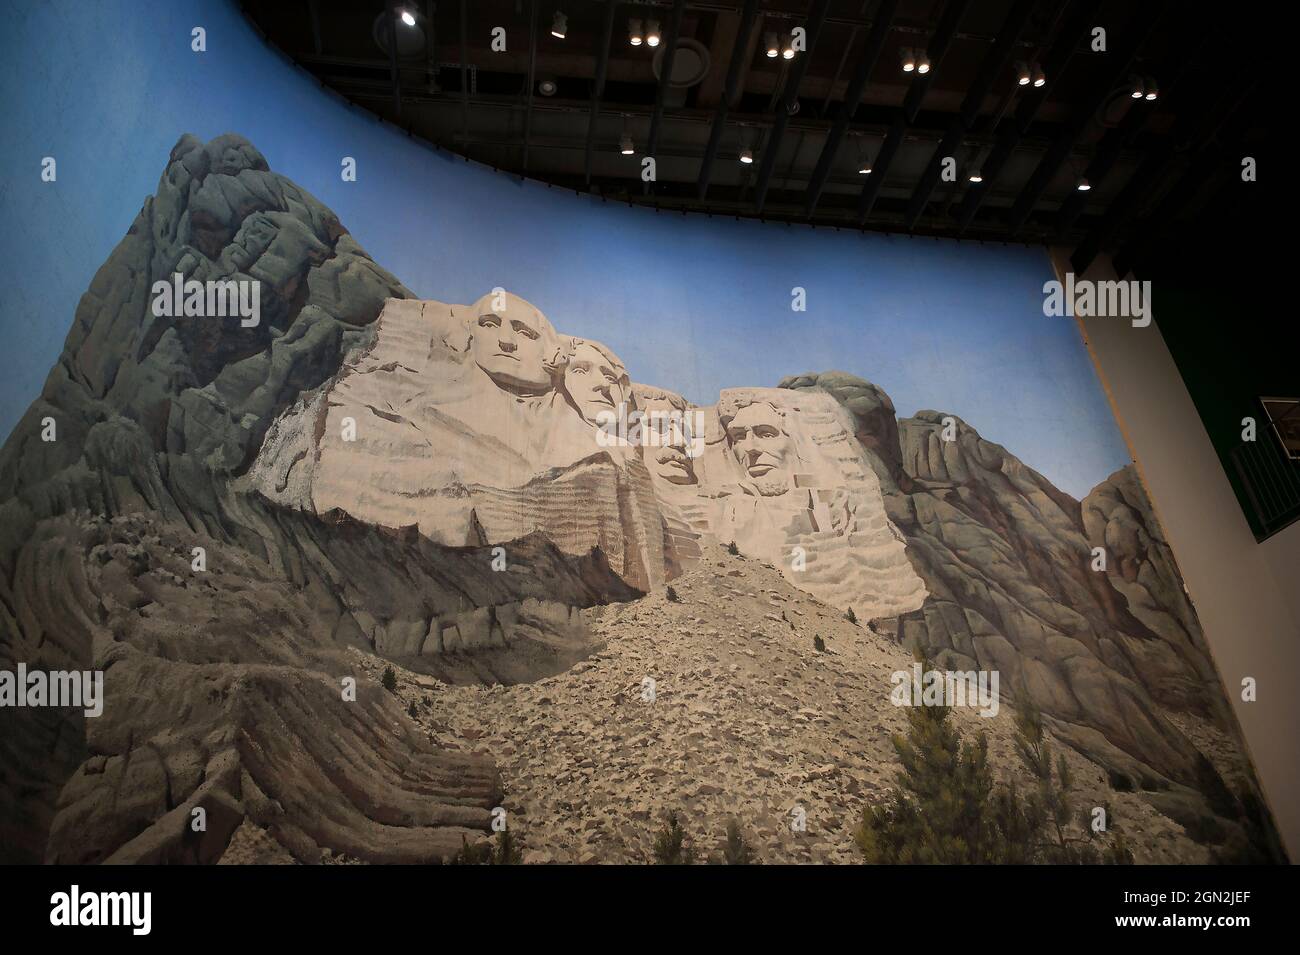 Painted backdrop of Mount Rushmore from Alfred Hitchcock movie North By Northwest on display at the Academy Museum of Motion Pictures, Los Angeles, CA Stock Photo